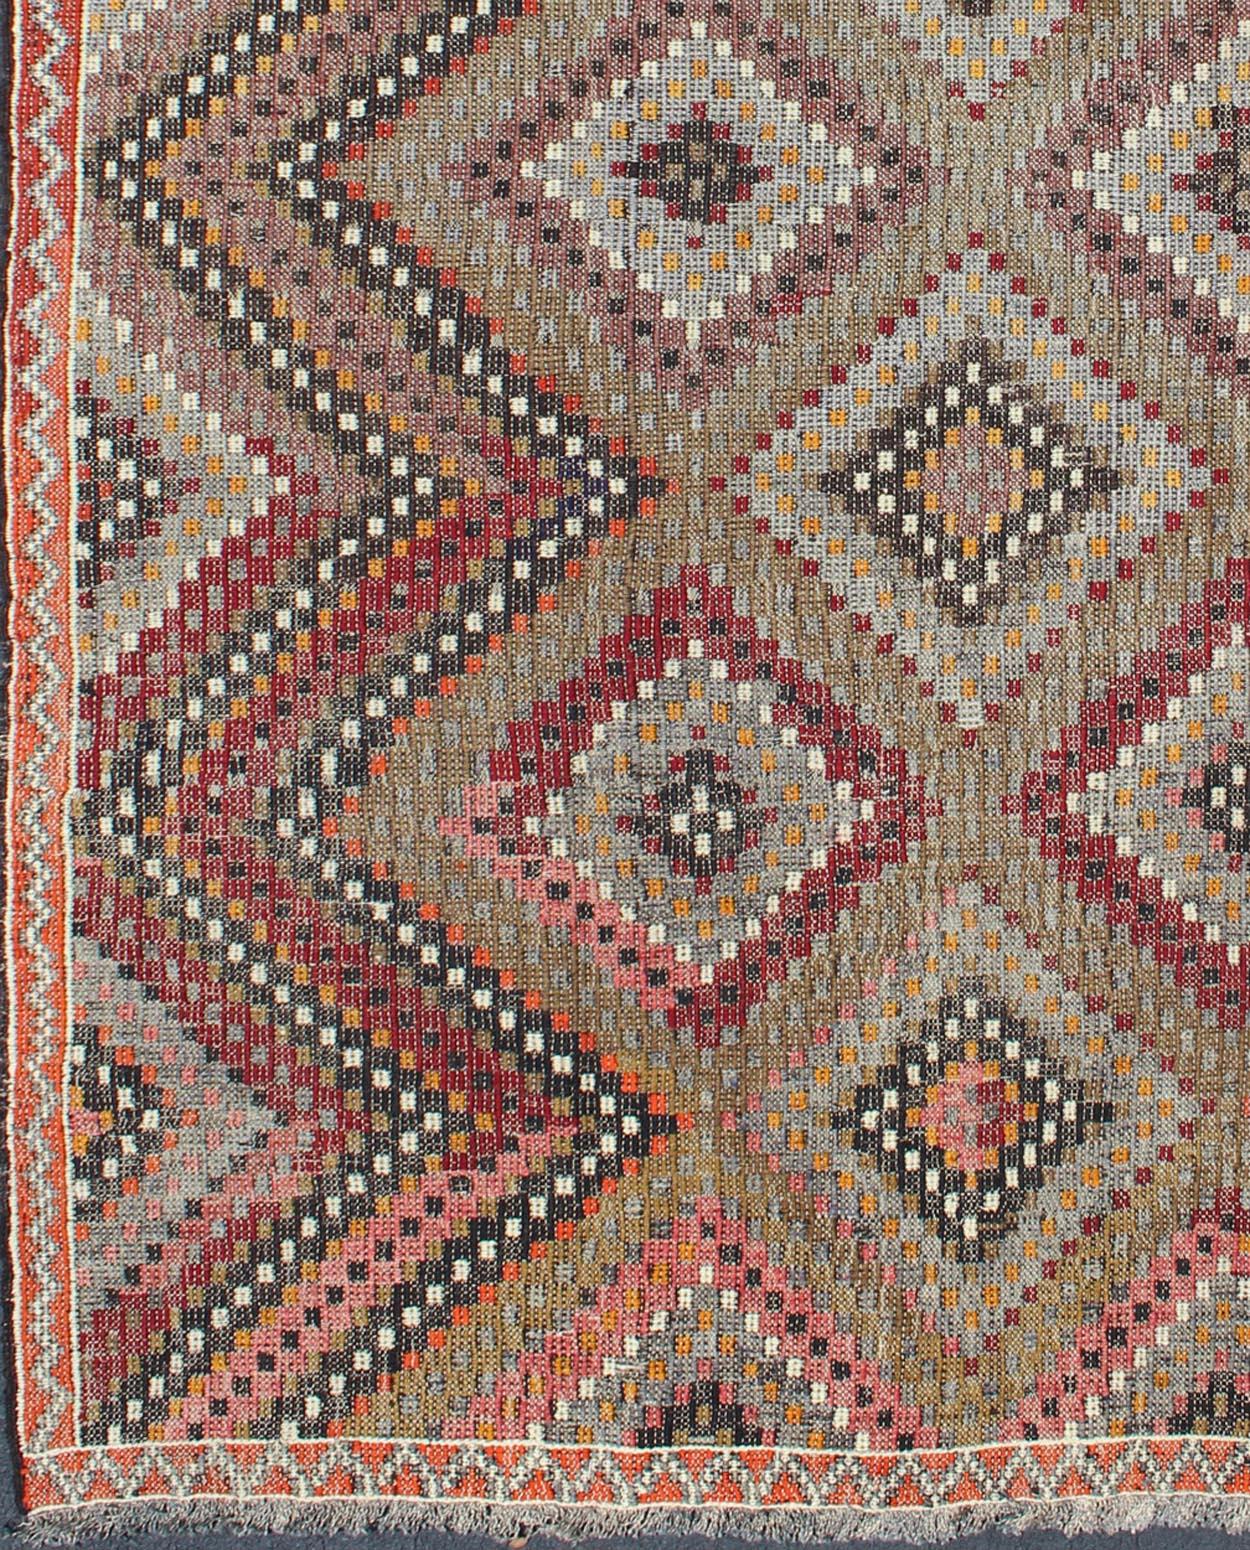 Measures: 6'5 x 10'2.
This Turkish embroidered Jajeem displays a repeating diamond pattern in the field and a simple zig-zag border. The taupe in the center gives this rug a neutral background. The other colors include shades of green, red, orange,